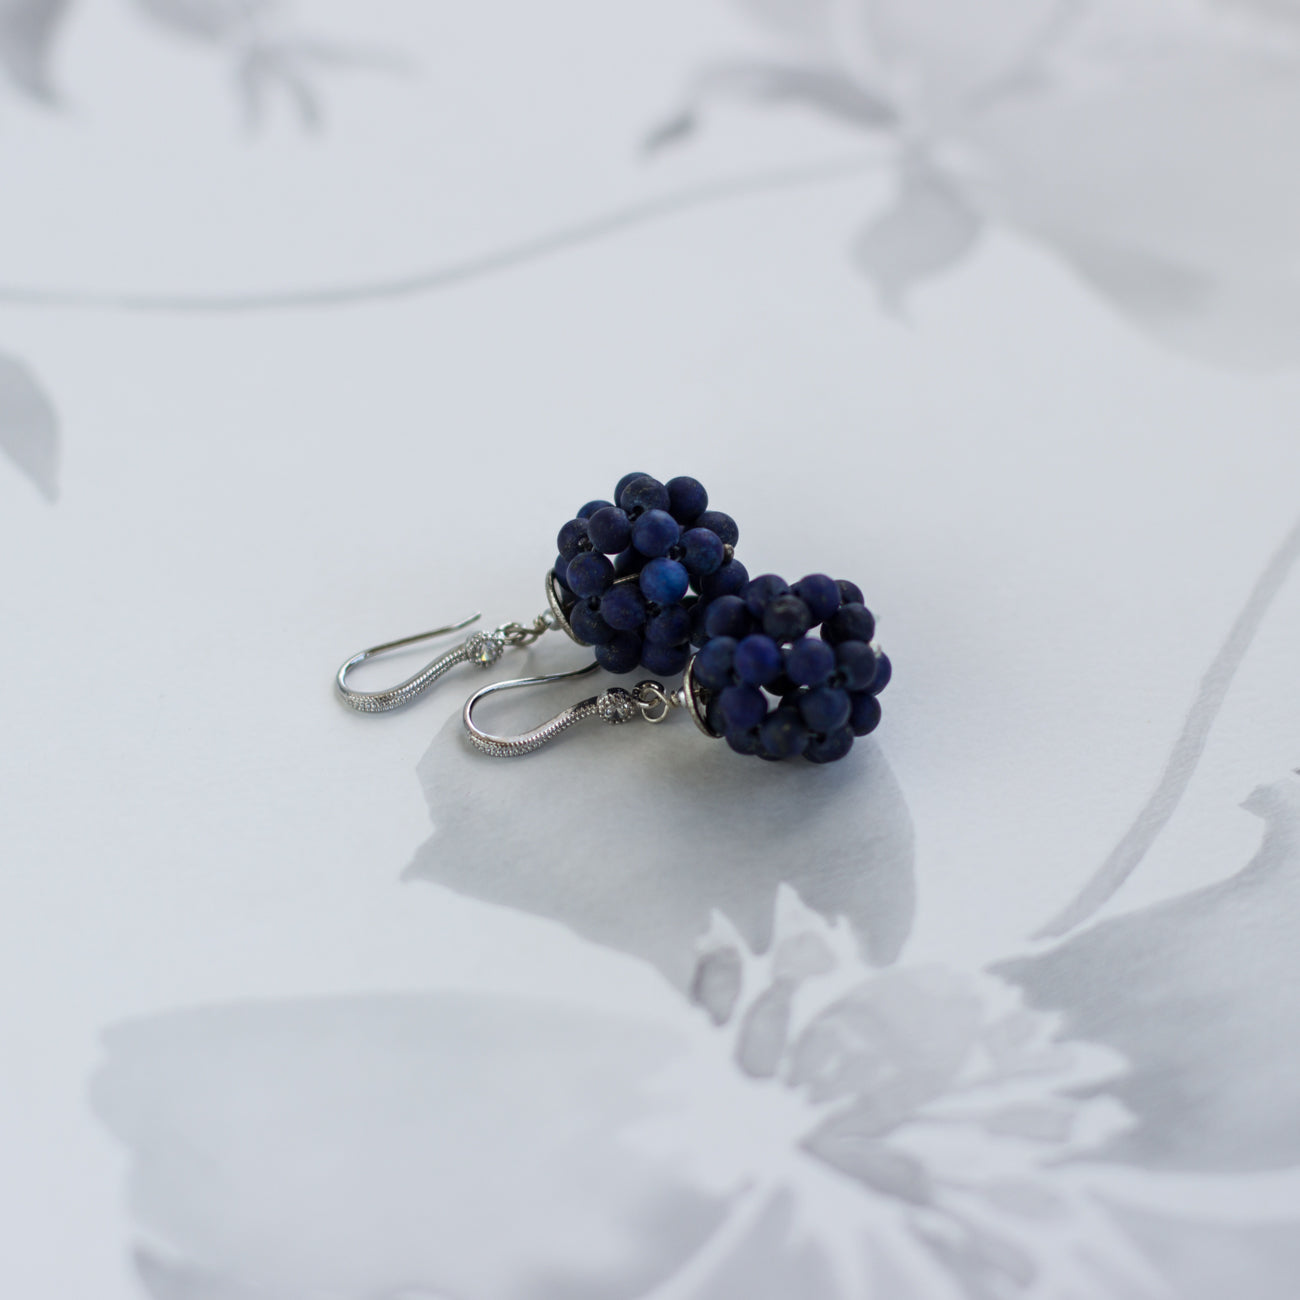 Shop for natural stone royal blue earrings featuring lapis lazuli. Handmade bubble lazurite earrings. Perfect for any occasion, adding a touch of elegance to your outfit. Great gift idea.